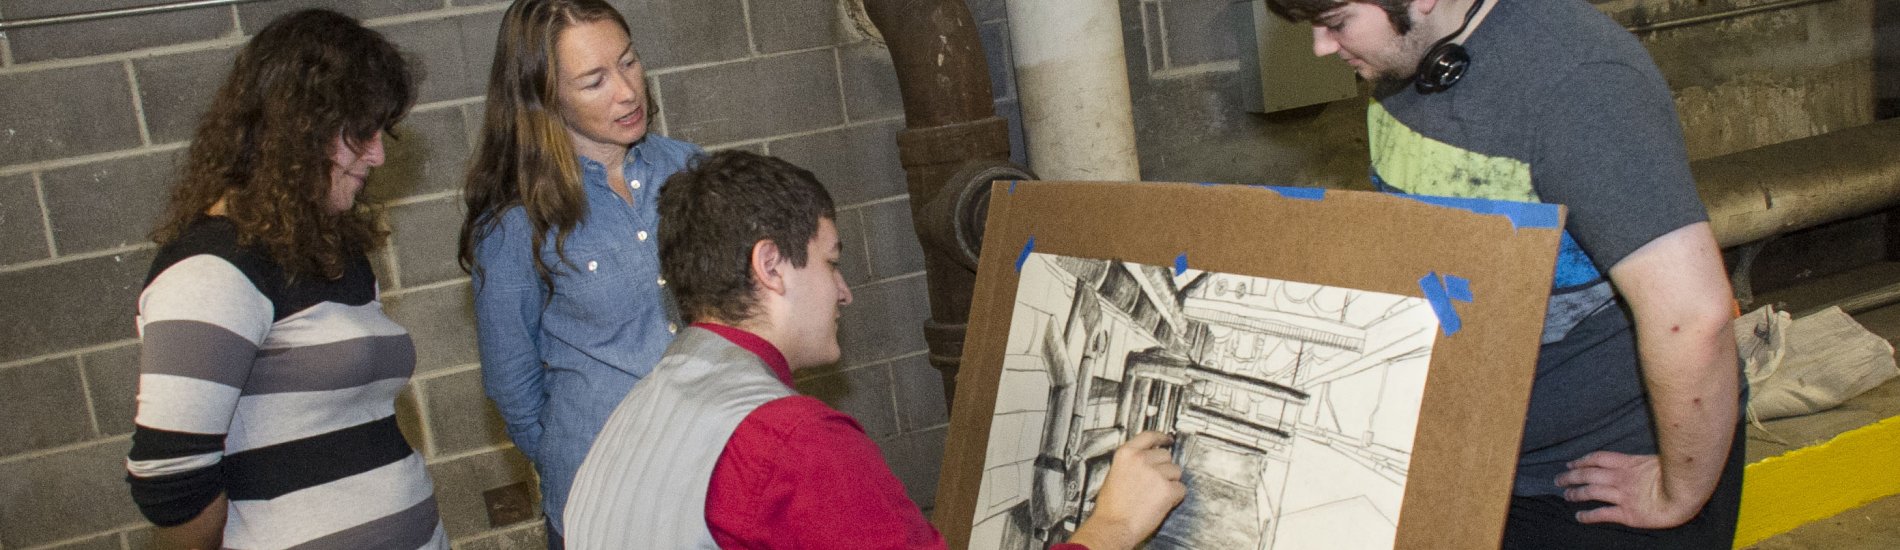 A group of students in an art drawing class.